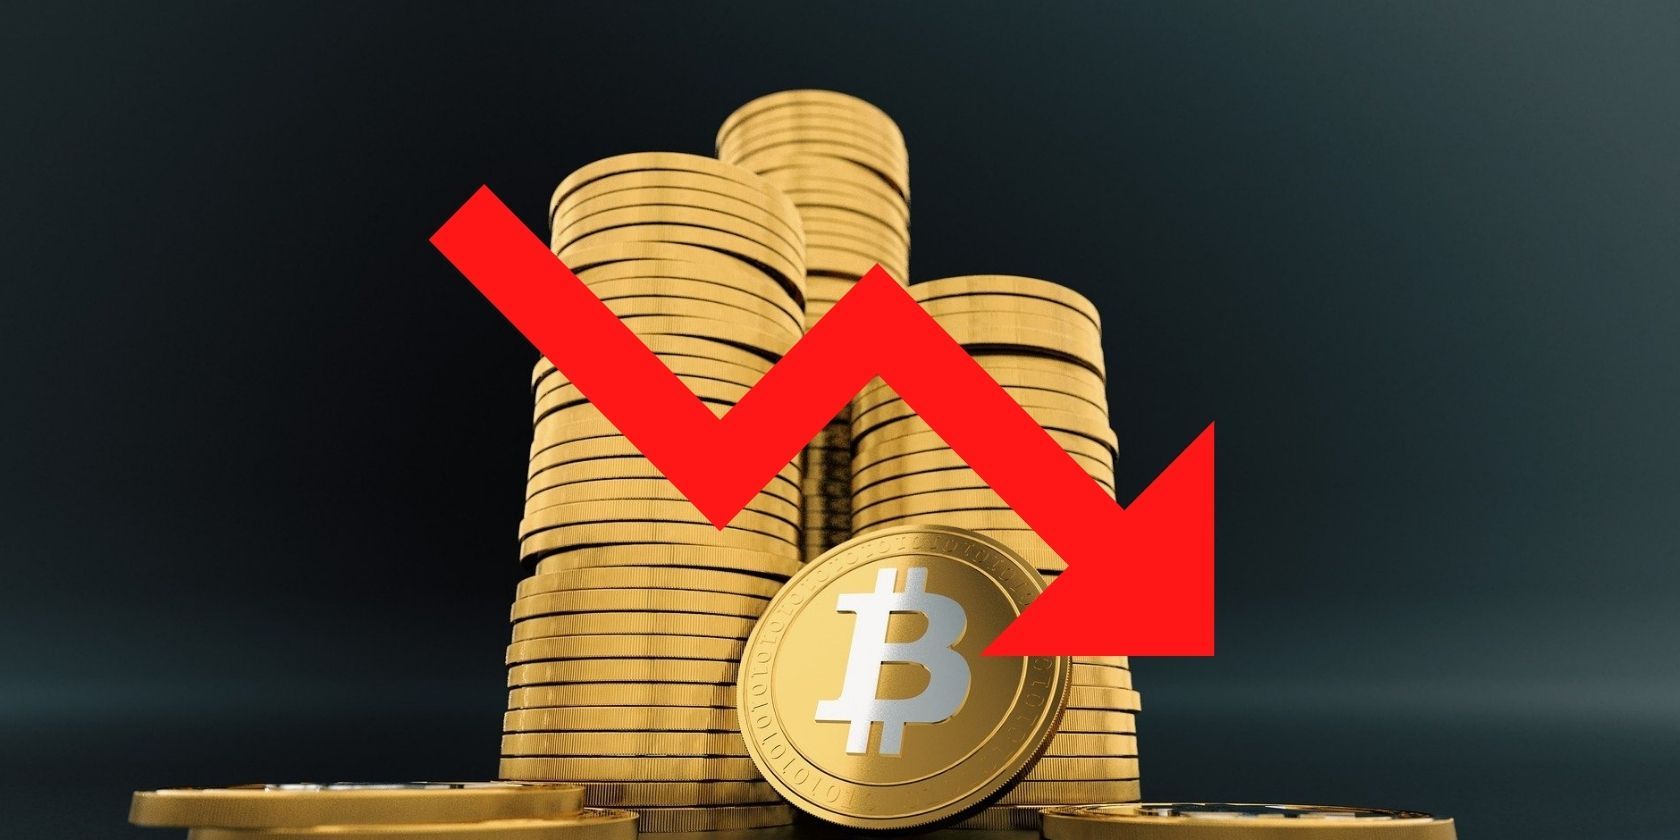 What Would Happen If Bitcoin's Price Crashes to Zero?